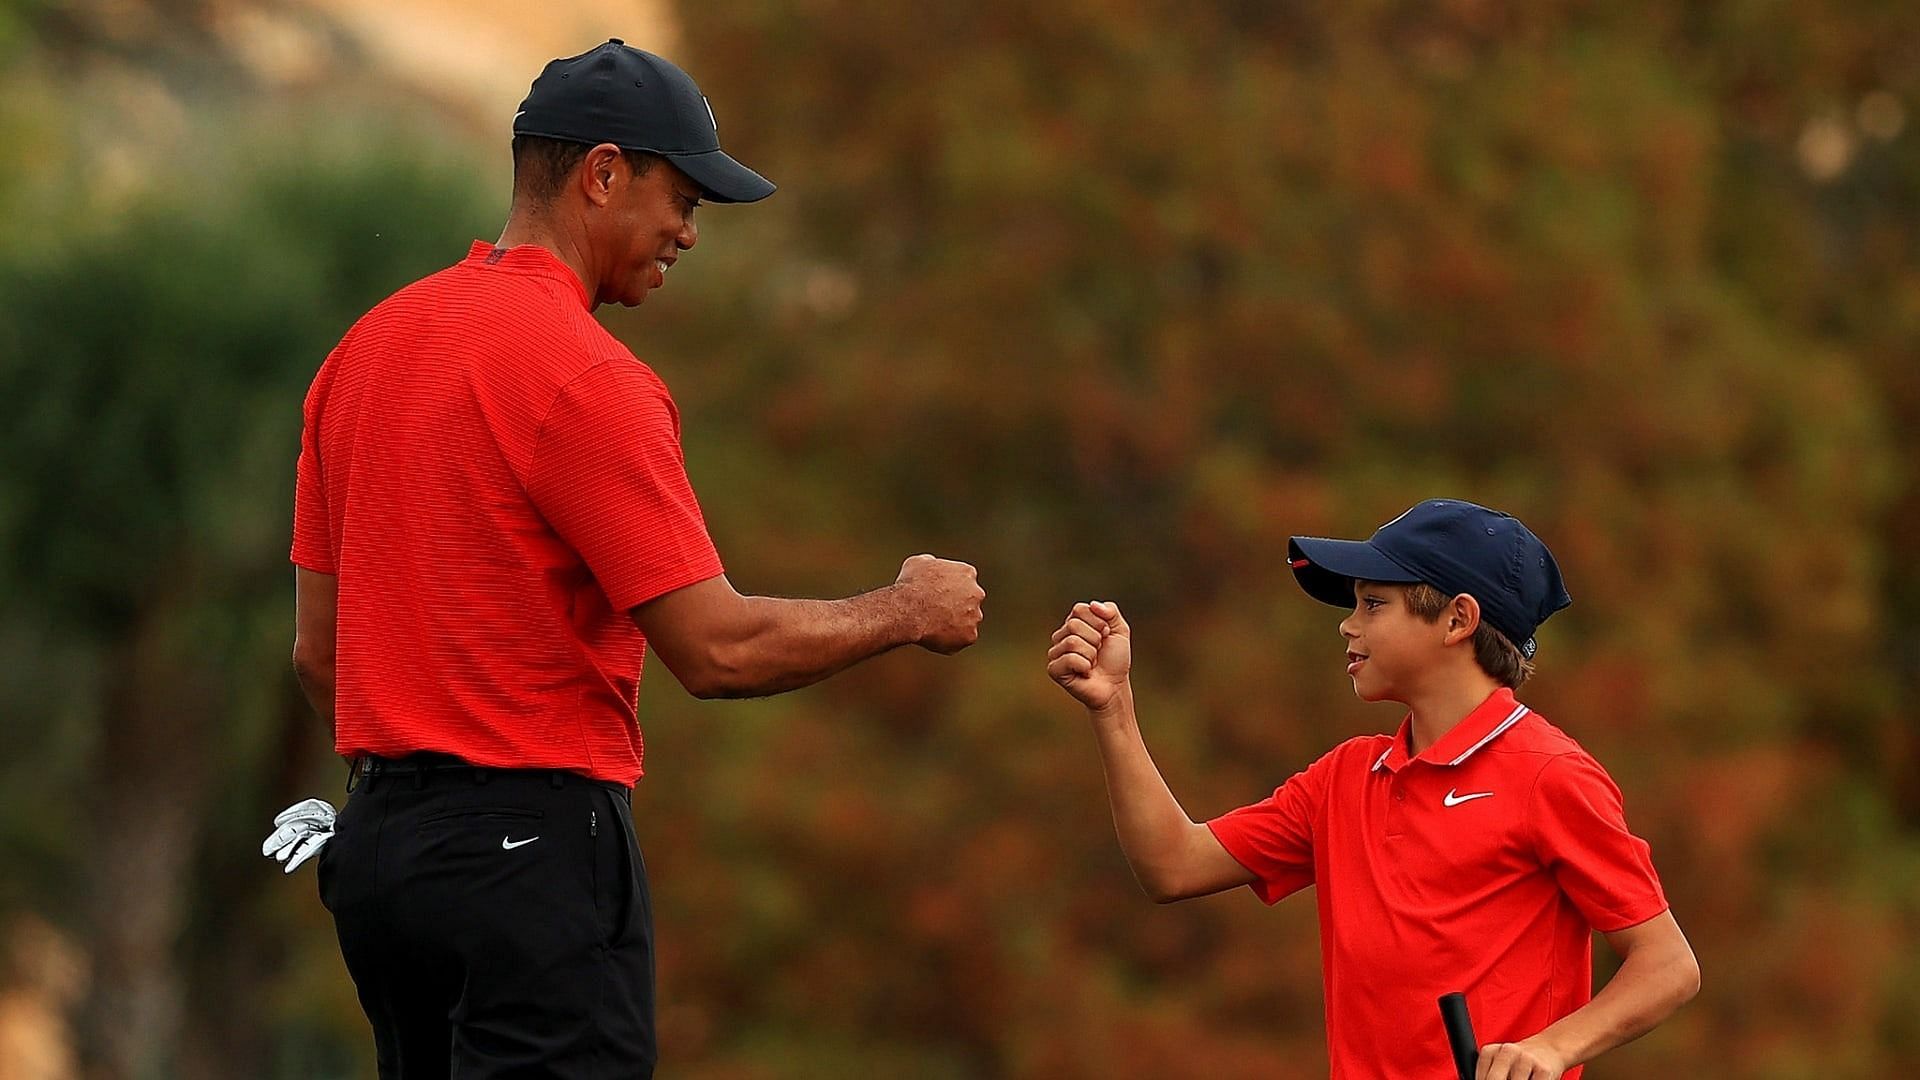 Tiger Woods fist bumping his son 